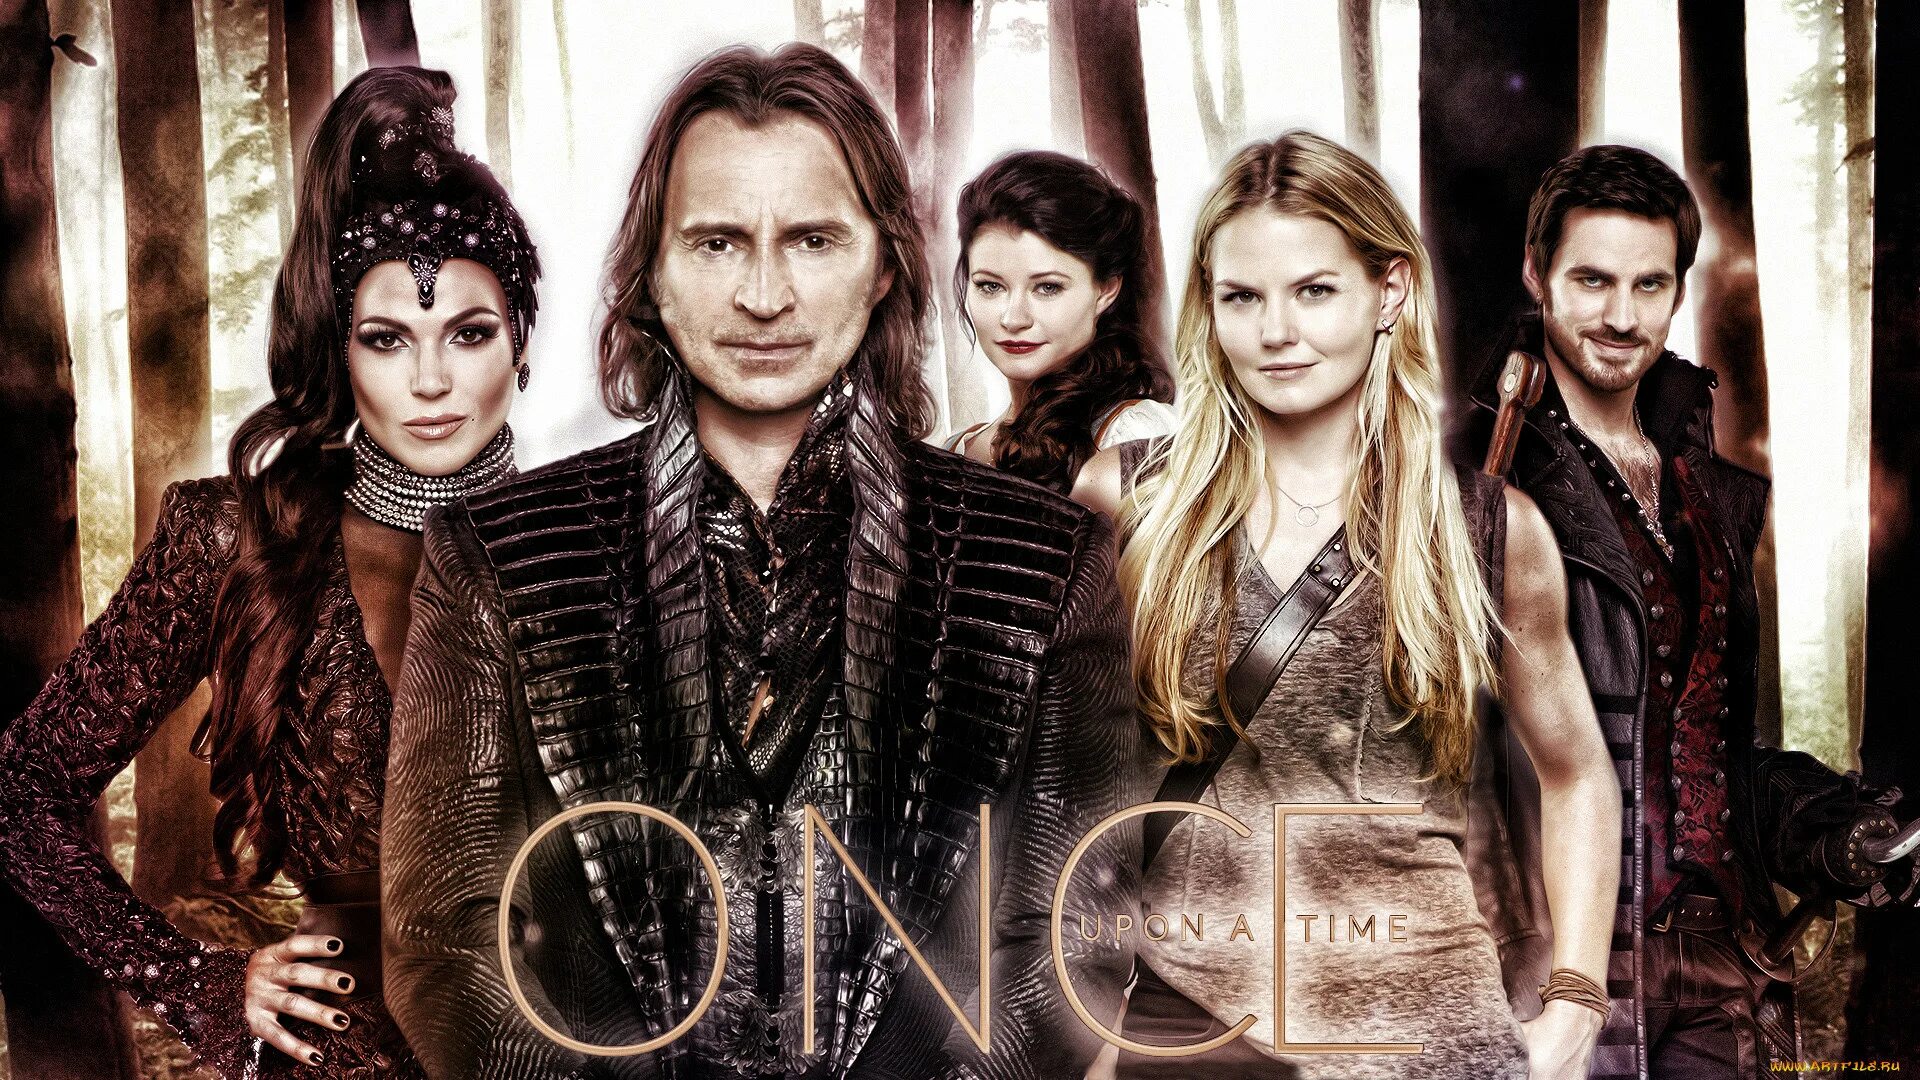 Once 10. Однажды в сказке once upon a TIMEУ. Once upon a time персонажи.